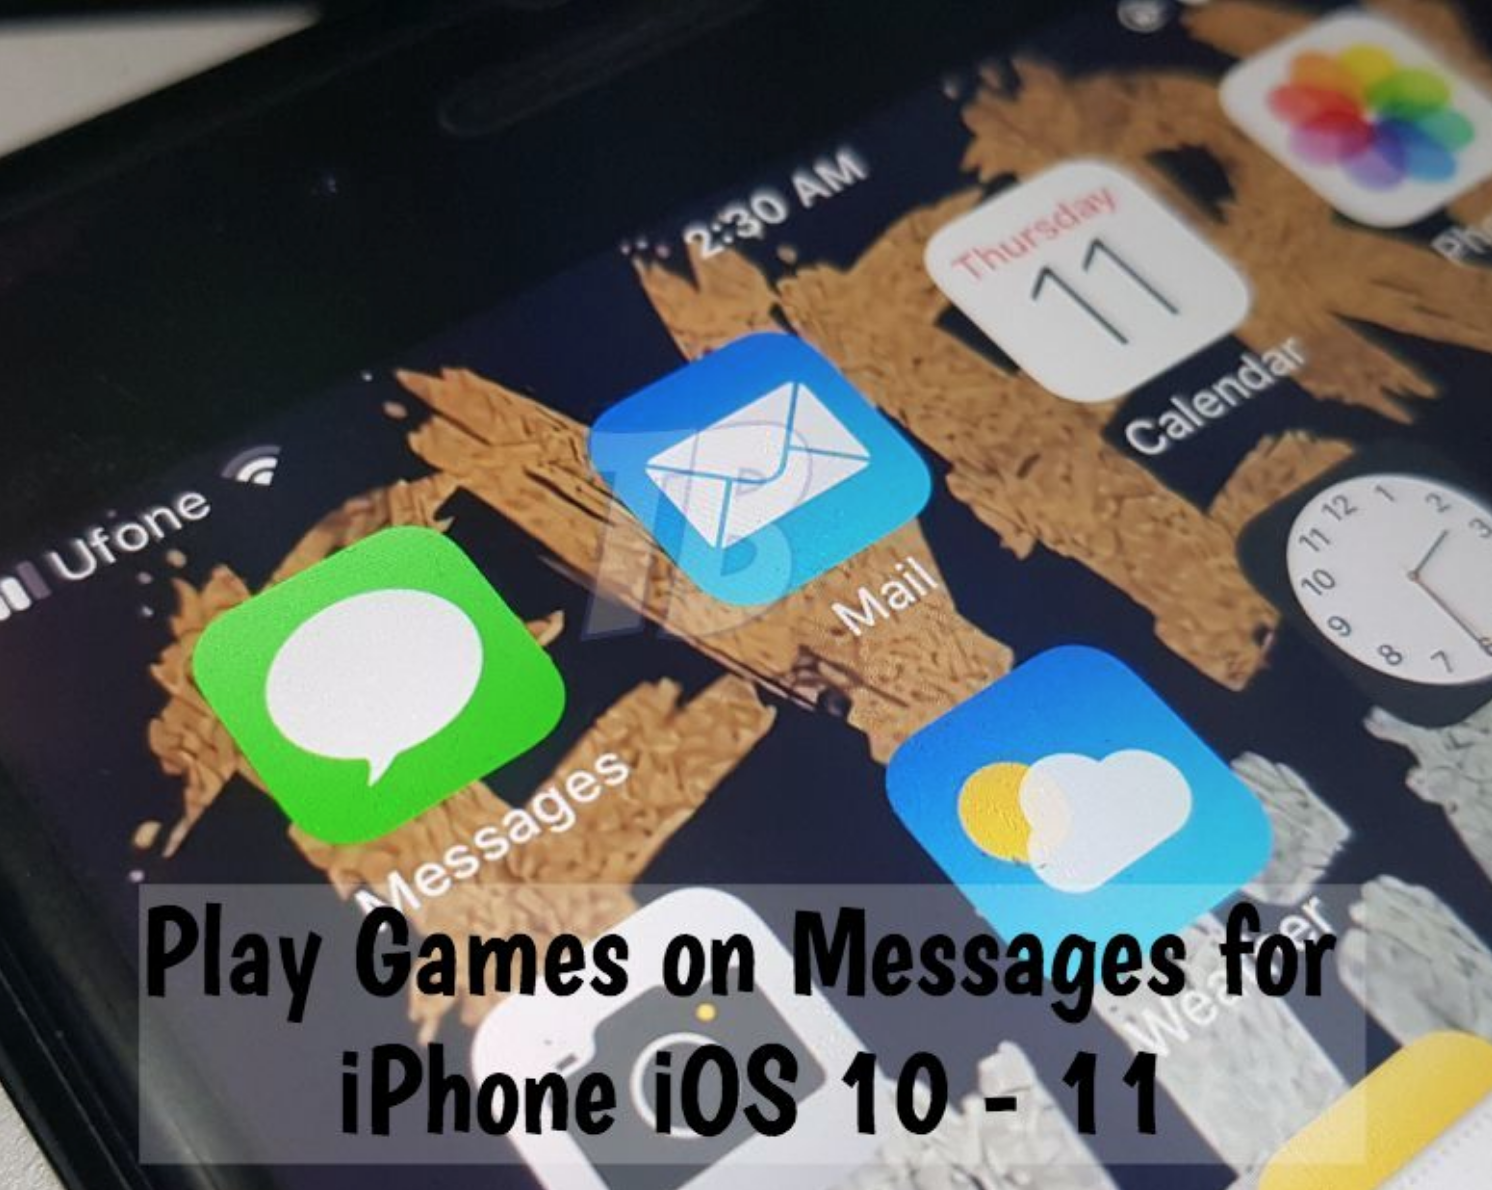 Play Games on Messages for iPhone iOS 10 - 11